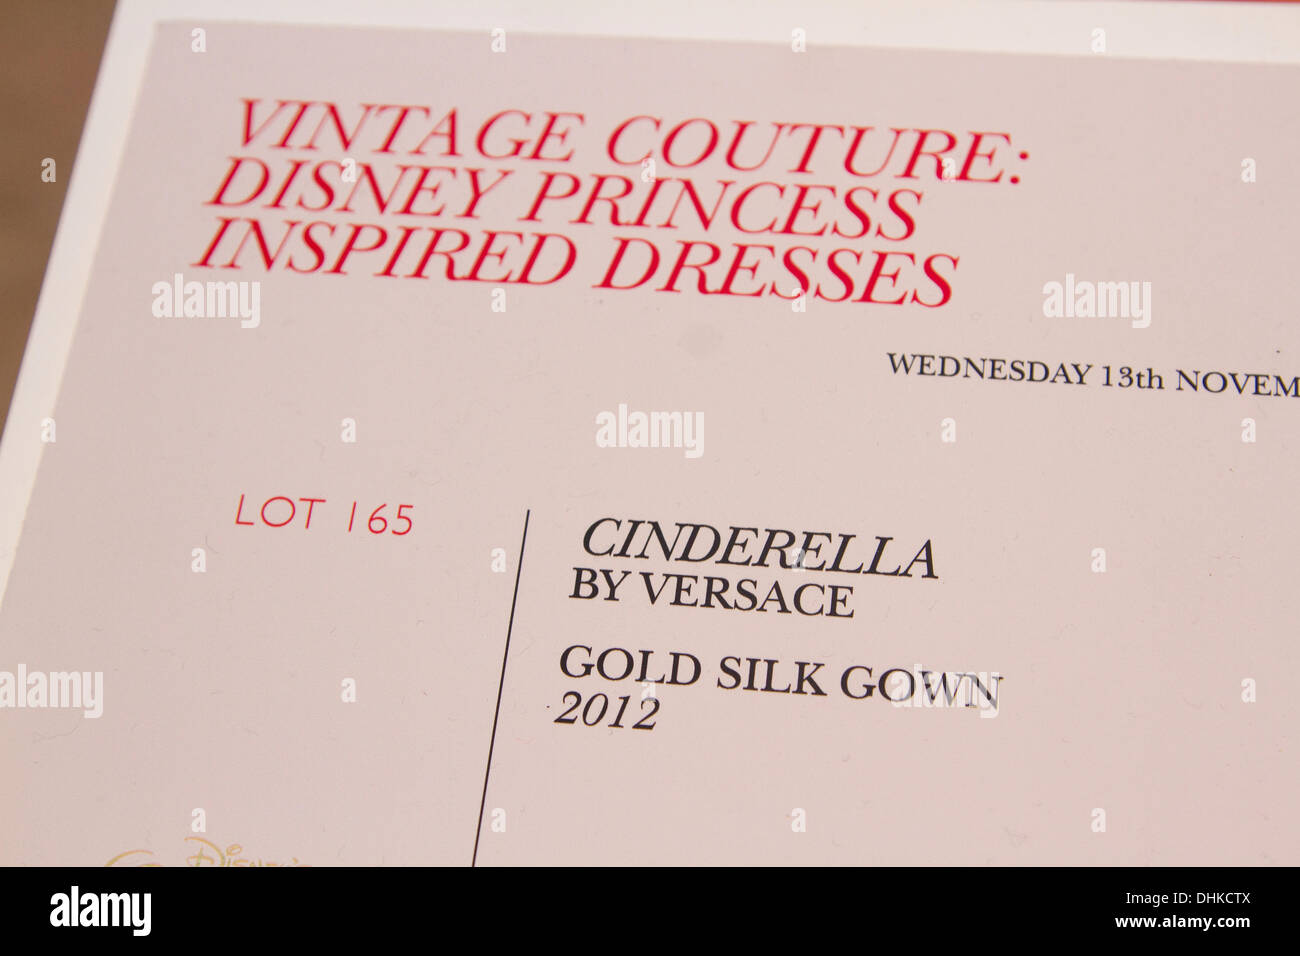 London, UK. 12th November 2013. 10 exclusive dresses as part of a collaboration between Disney and Harrods are to be auctioned at Christies to raise money for Great Ormond Street charity. The princess dresses were made by the top fashion designers to pay tribute to Disney stories and the best loved princesses Cinderella, Snow White, Princess Jasmine, Princess Tiana, Princess Aurora, Princess Rapunzel and Princess Pocahontas Credit:  amer ghazzal/Alamy Live News Stock Photo